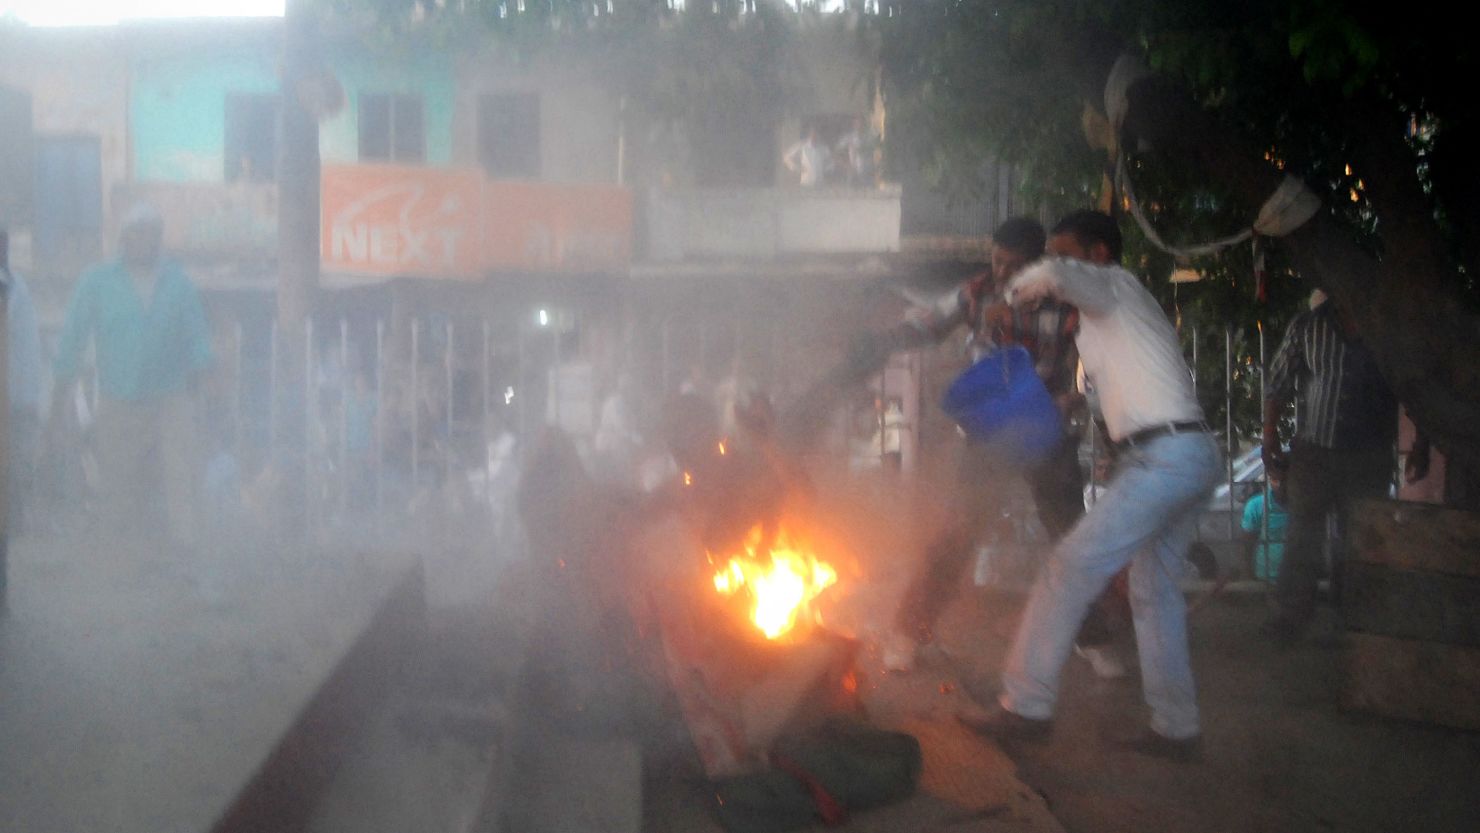 Indian bystanders attempt to douse the blaze as a local politician and a man are engulfed in flames.